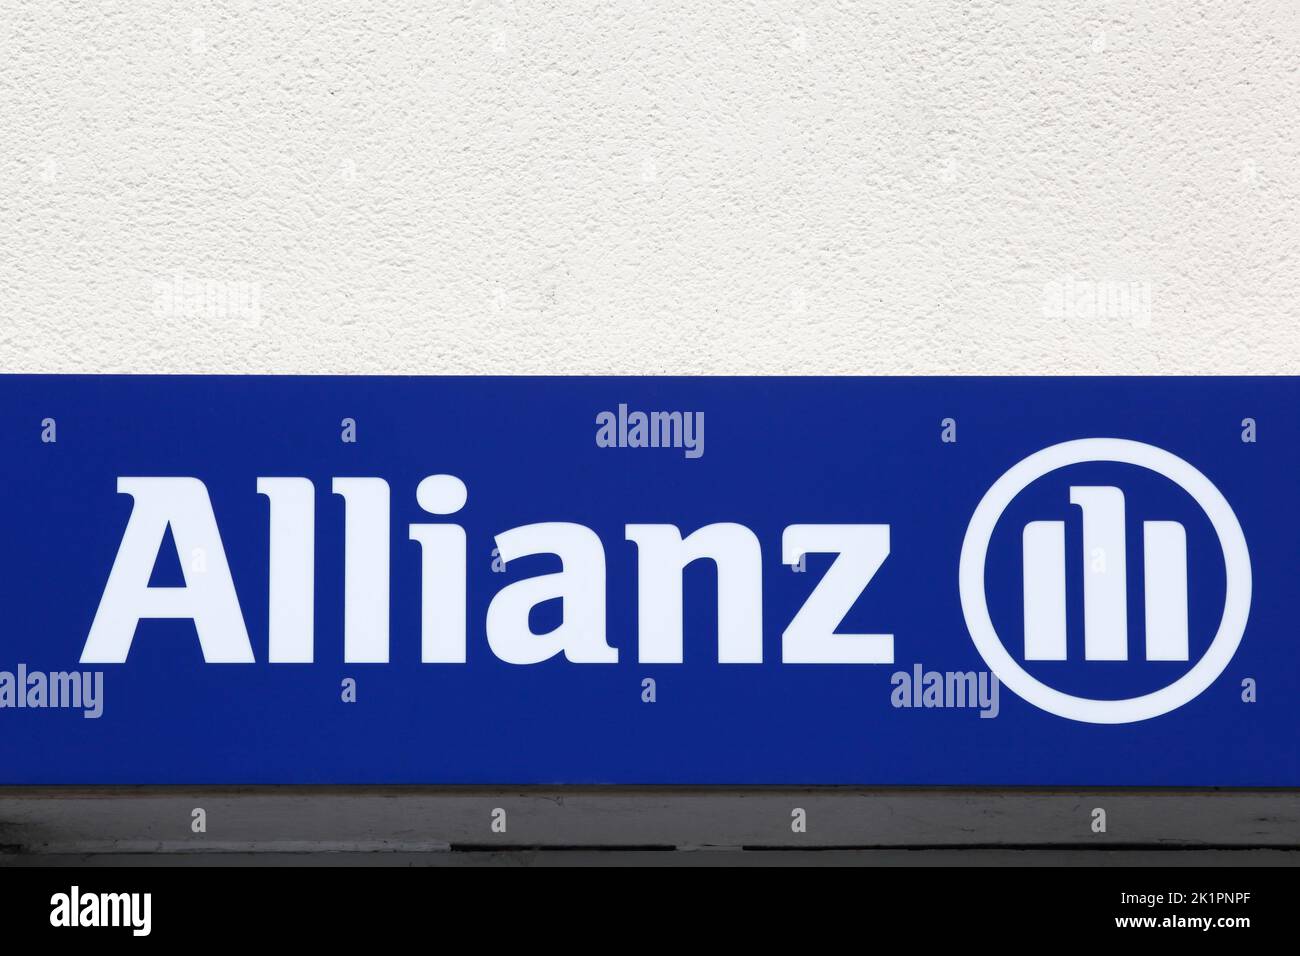 Gourdon, France - June 26, 2021: Allianz sign on a wall. Allianz is a European financial services company headquartered in Munich, Germany Stock Photo